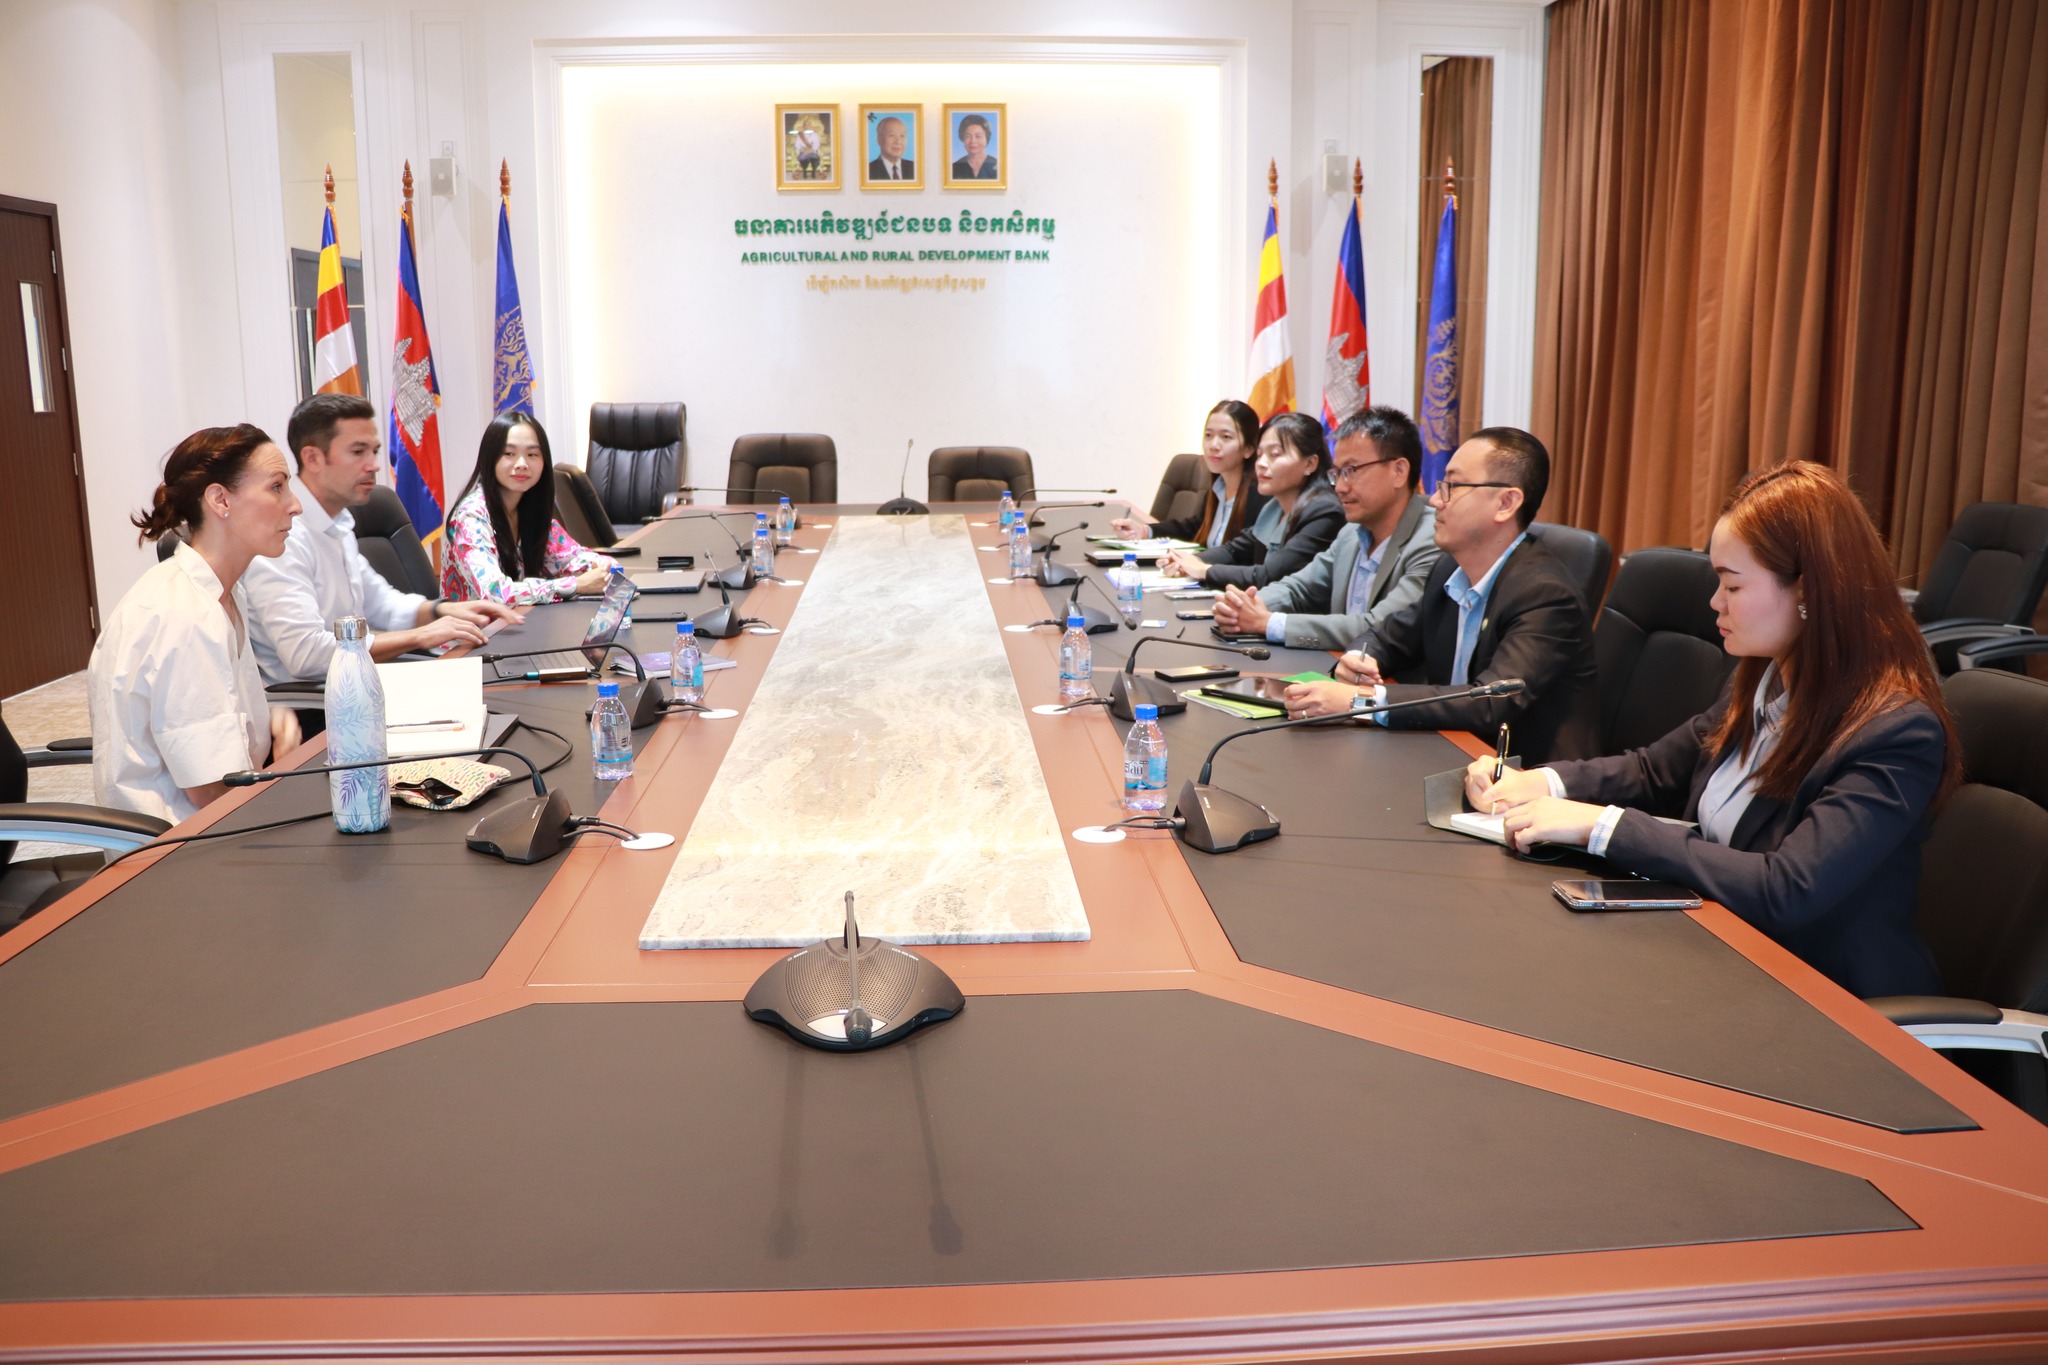 Green Finance Department and Business Development and Strategy Department attended the meeting with Mekong Strategic Capital